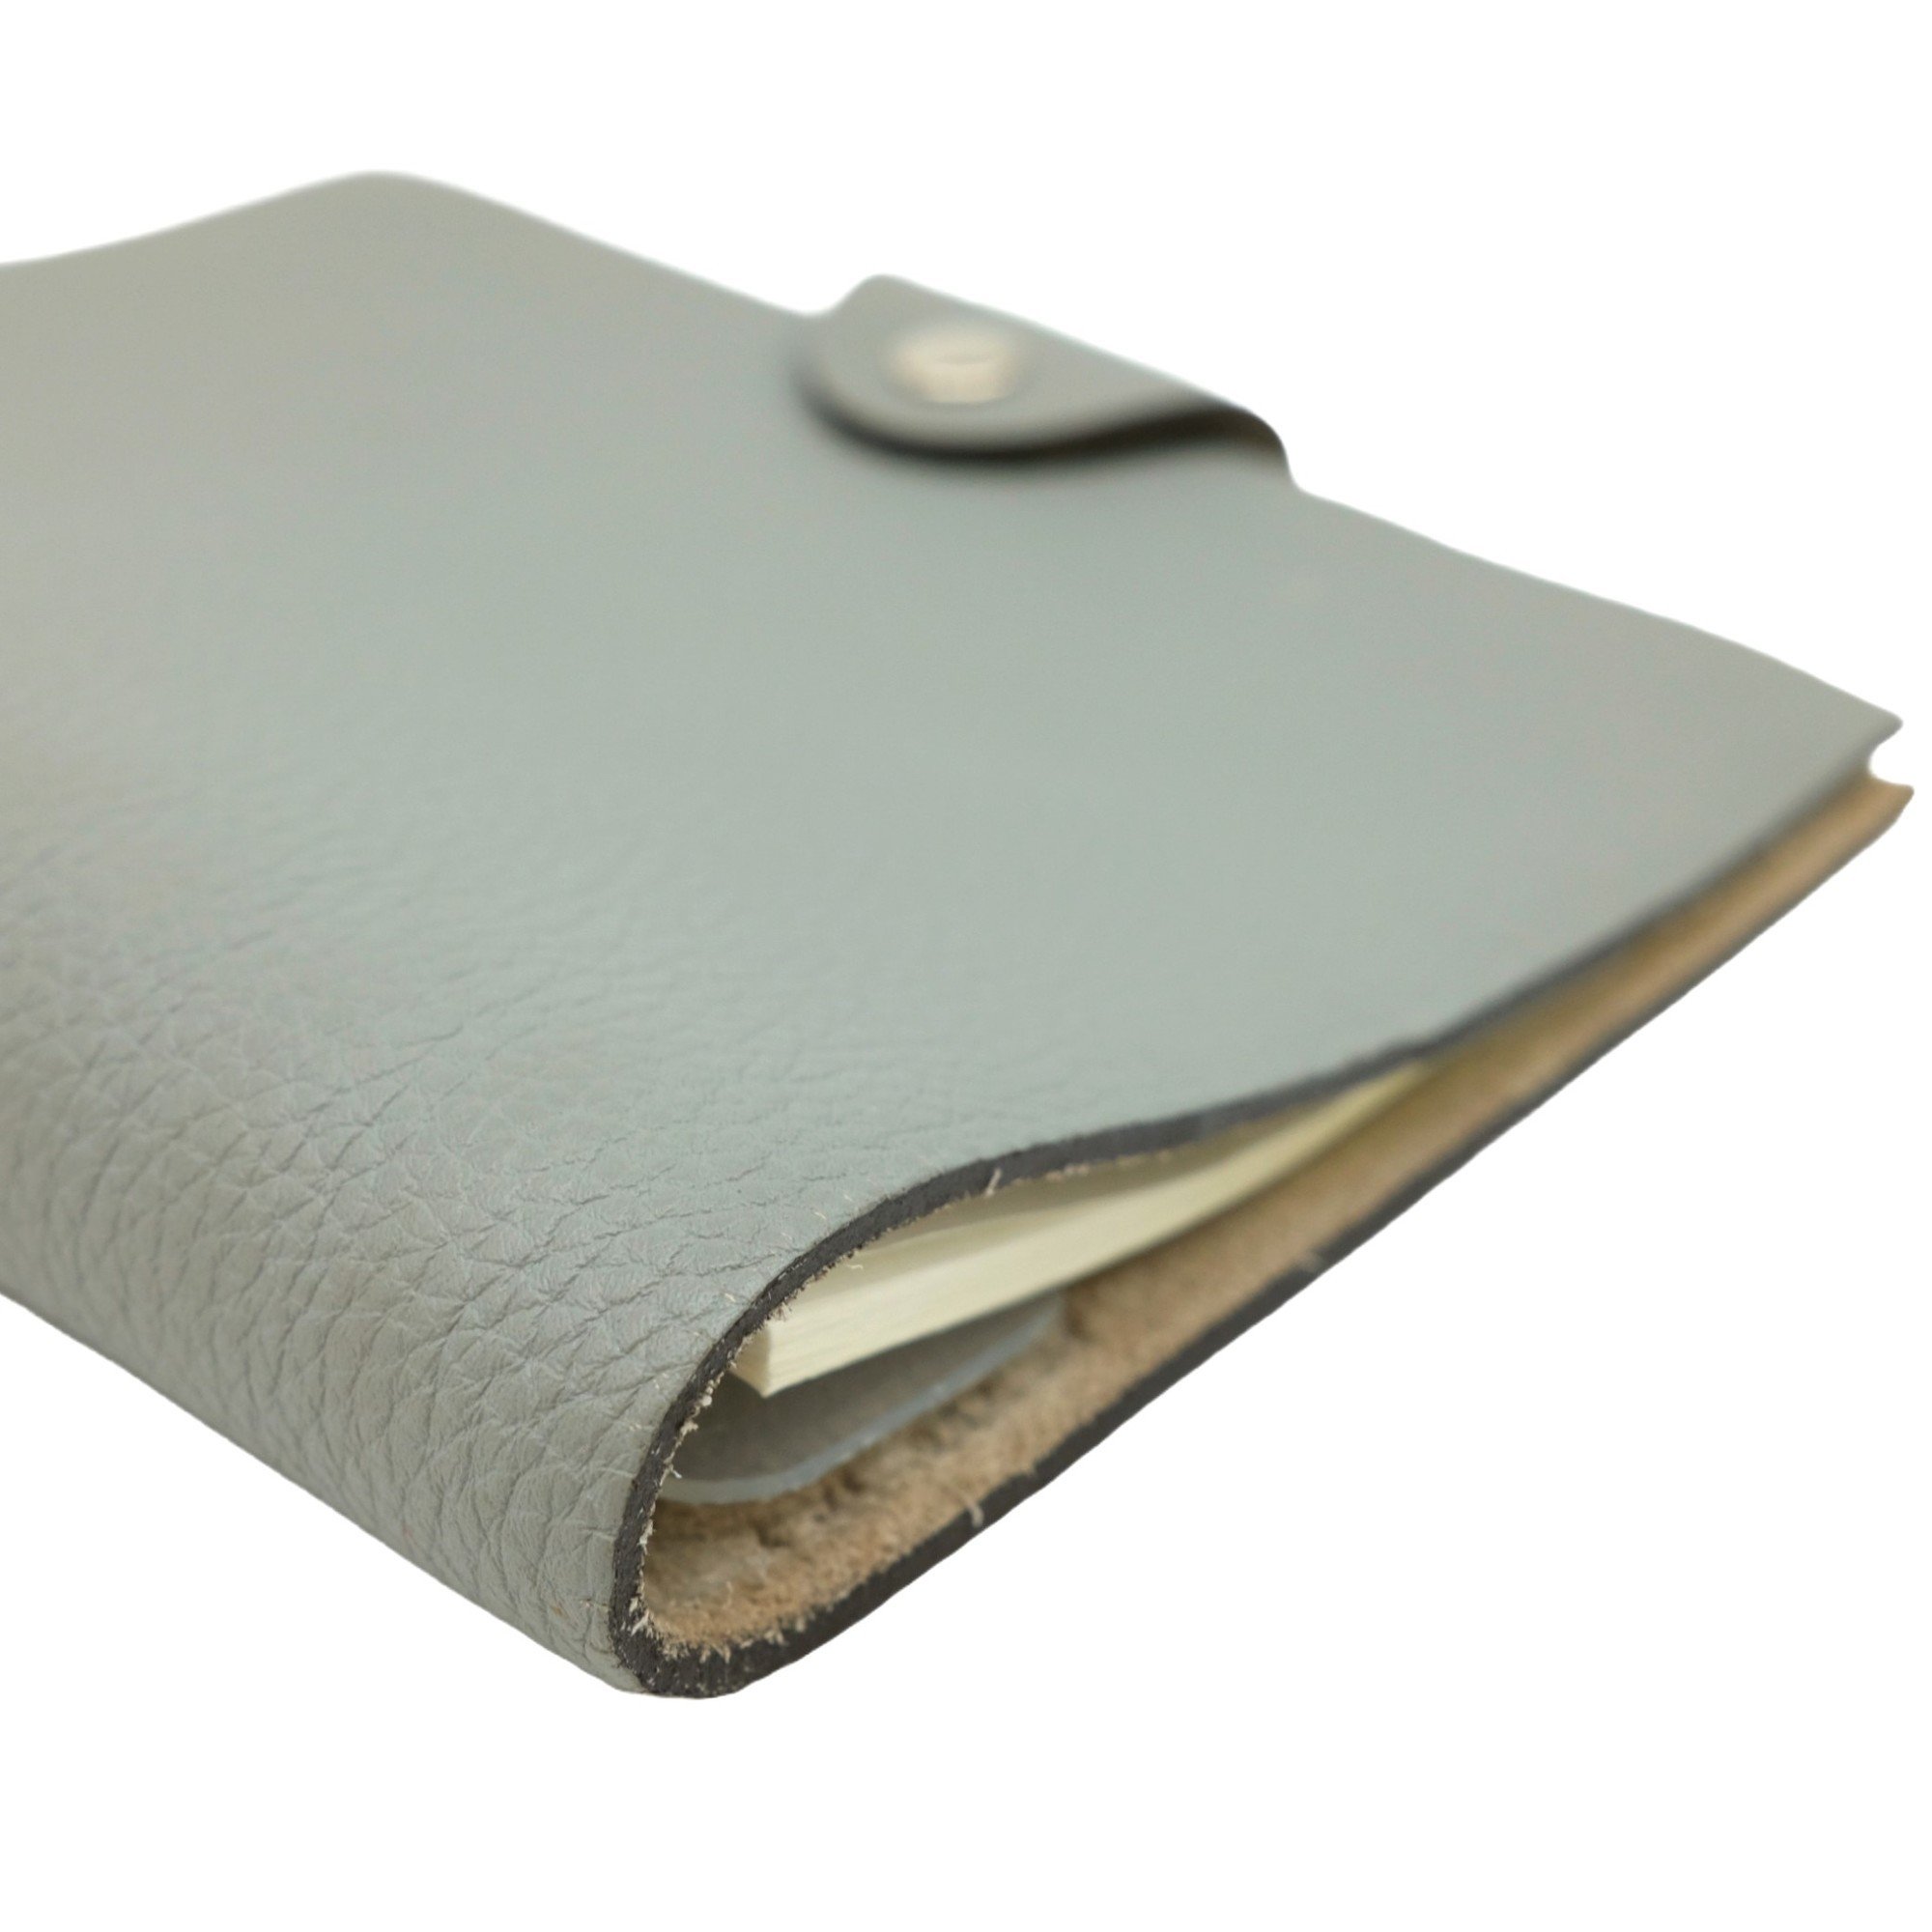 HERMES Hermes Notebook Cover Ulysse PM Taurillon Clemence Grey